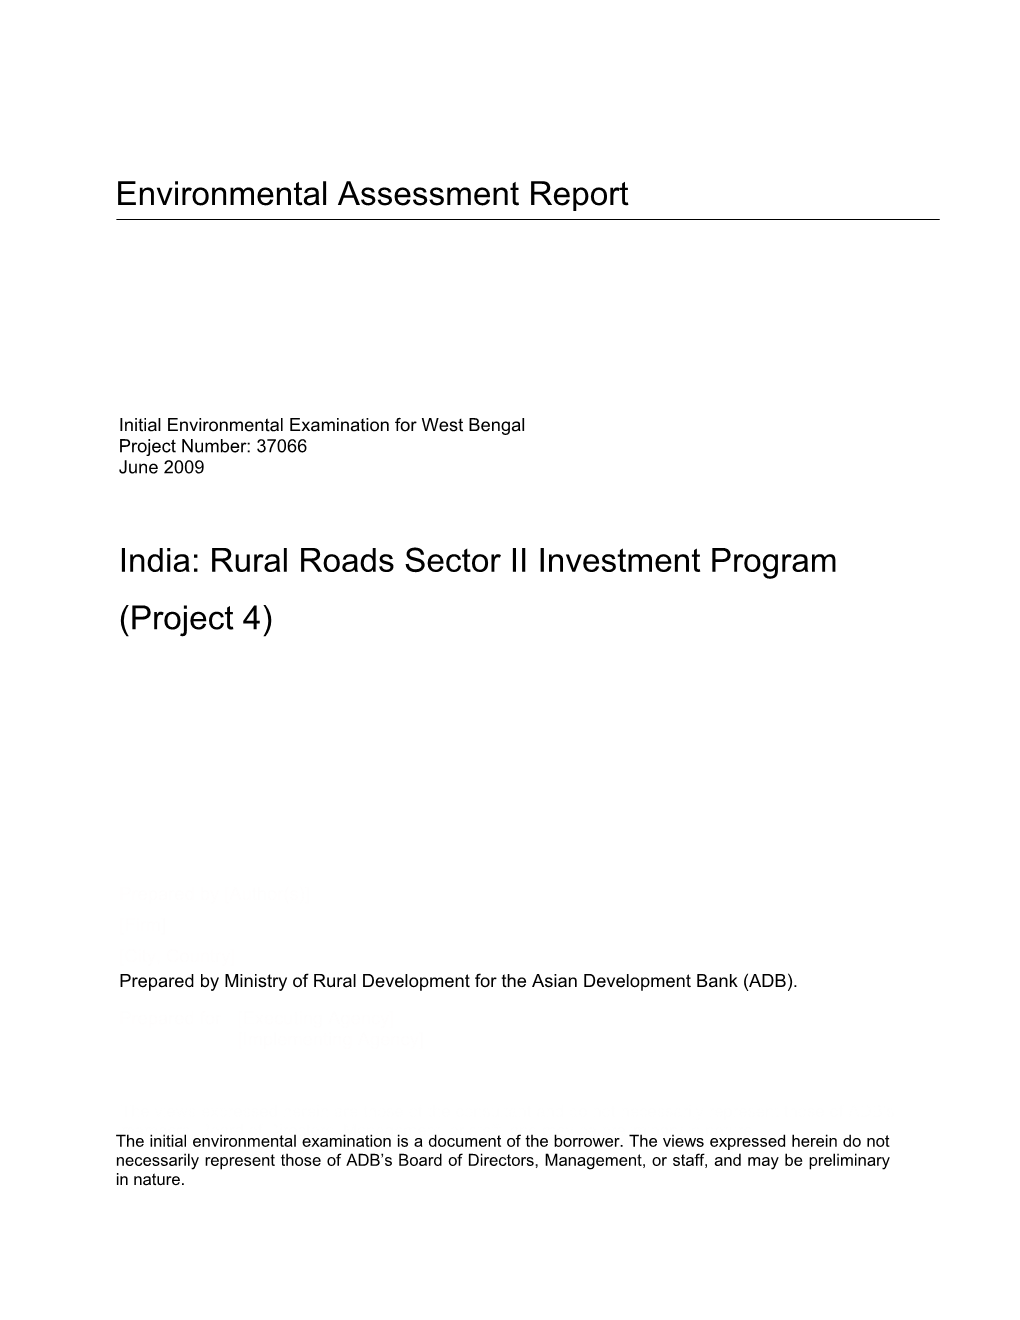 IEE: India: Rural Roads Sector II Investment Program (Project 4)